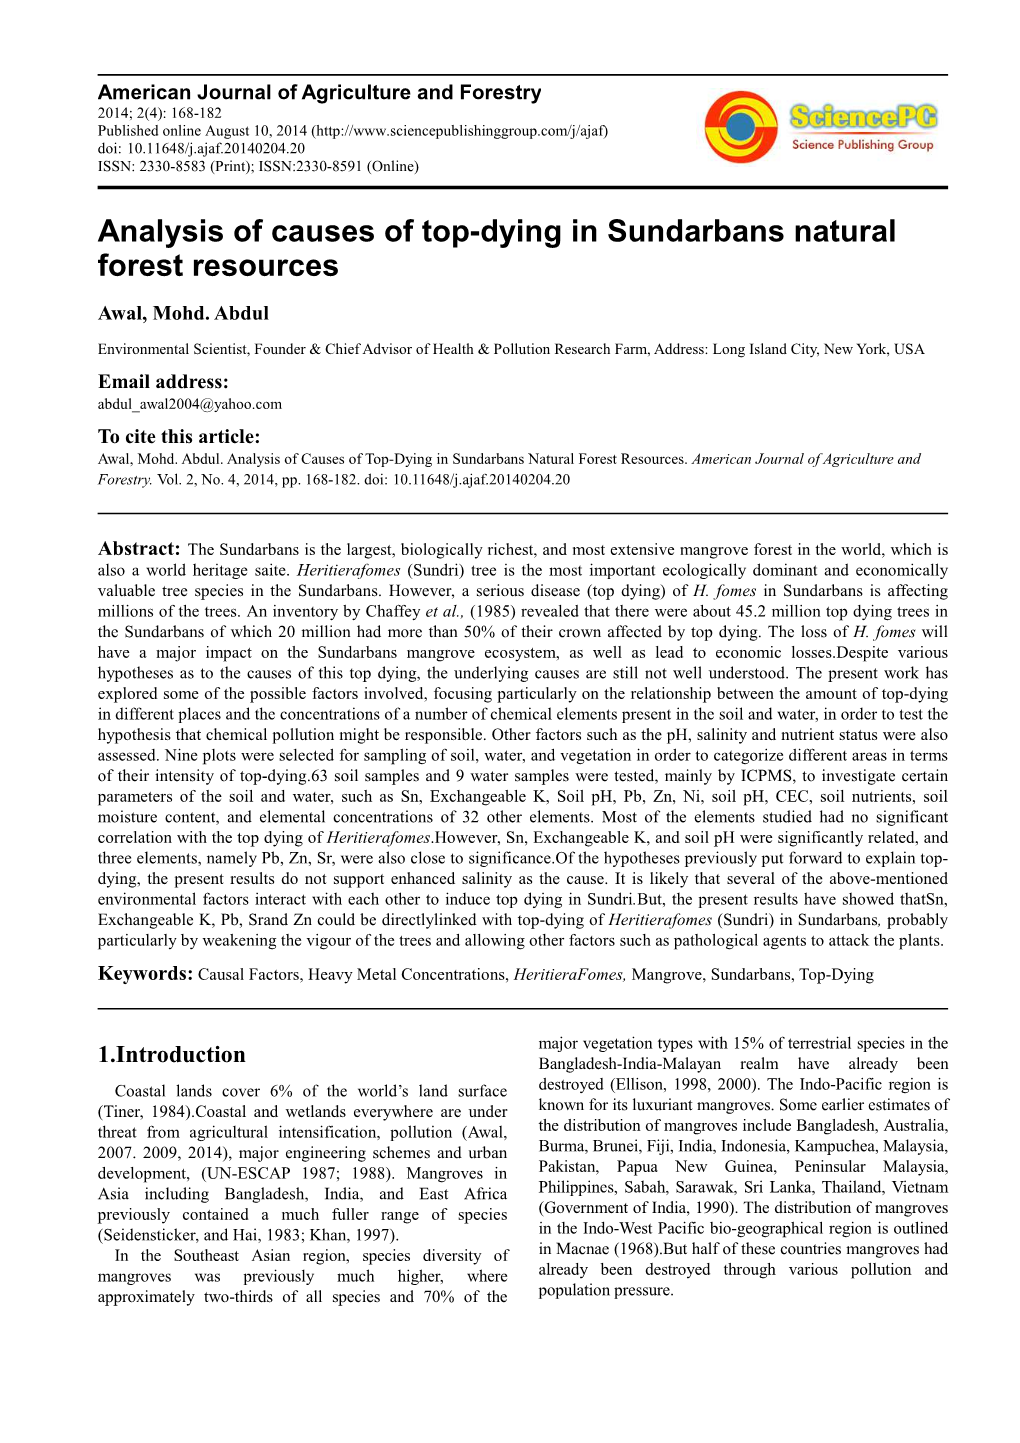 Analysis of Causes of Top-Dying in Sundarbans Natural Forest Resources